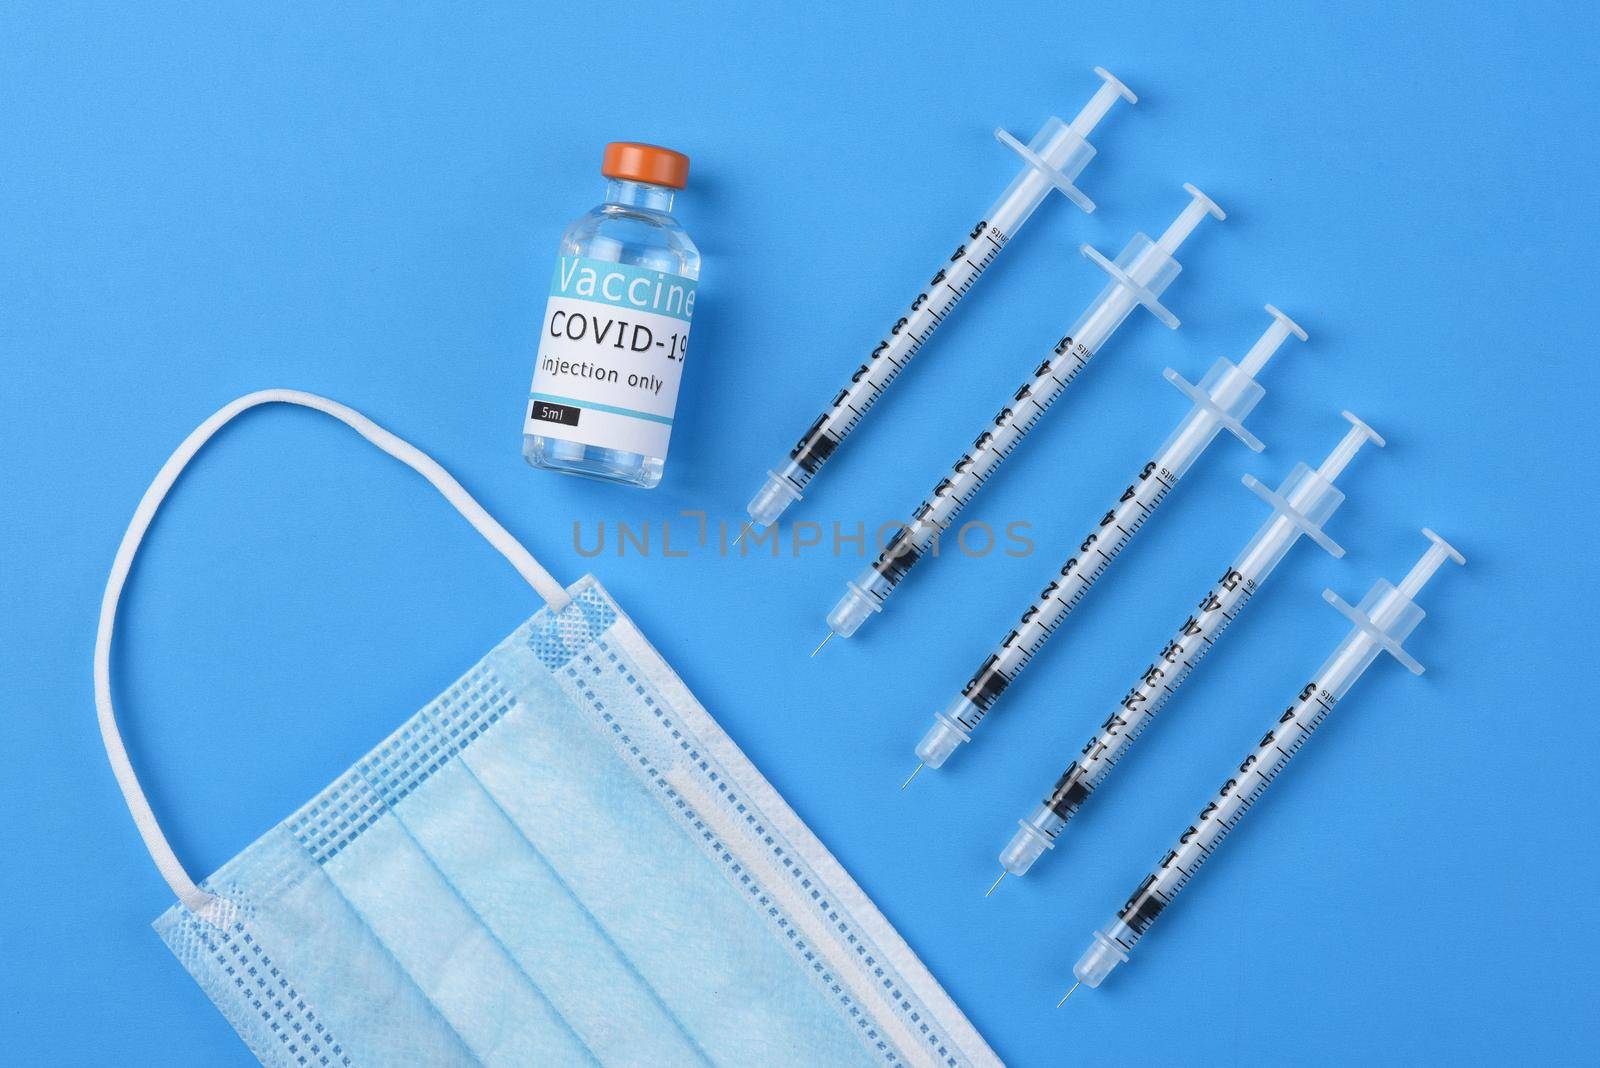 Flat lay shot of syringes a vial of Covid-19 vaccine and a surgical mask on a blue background.